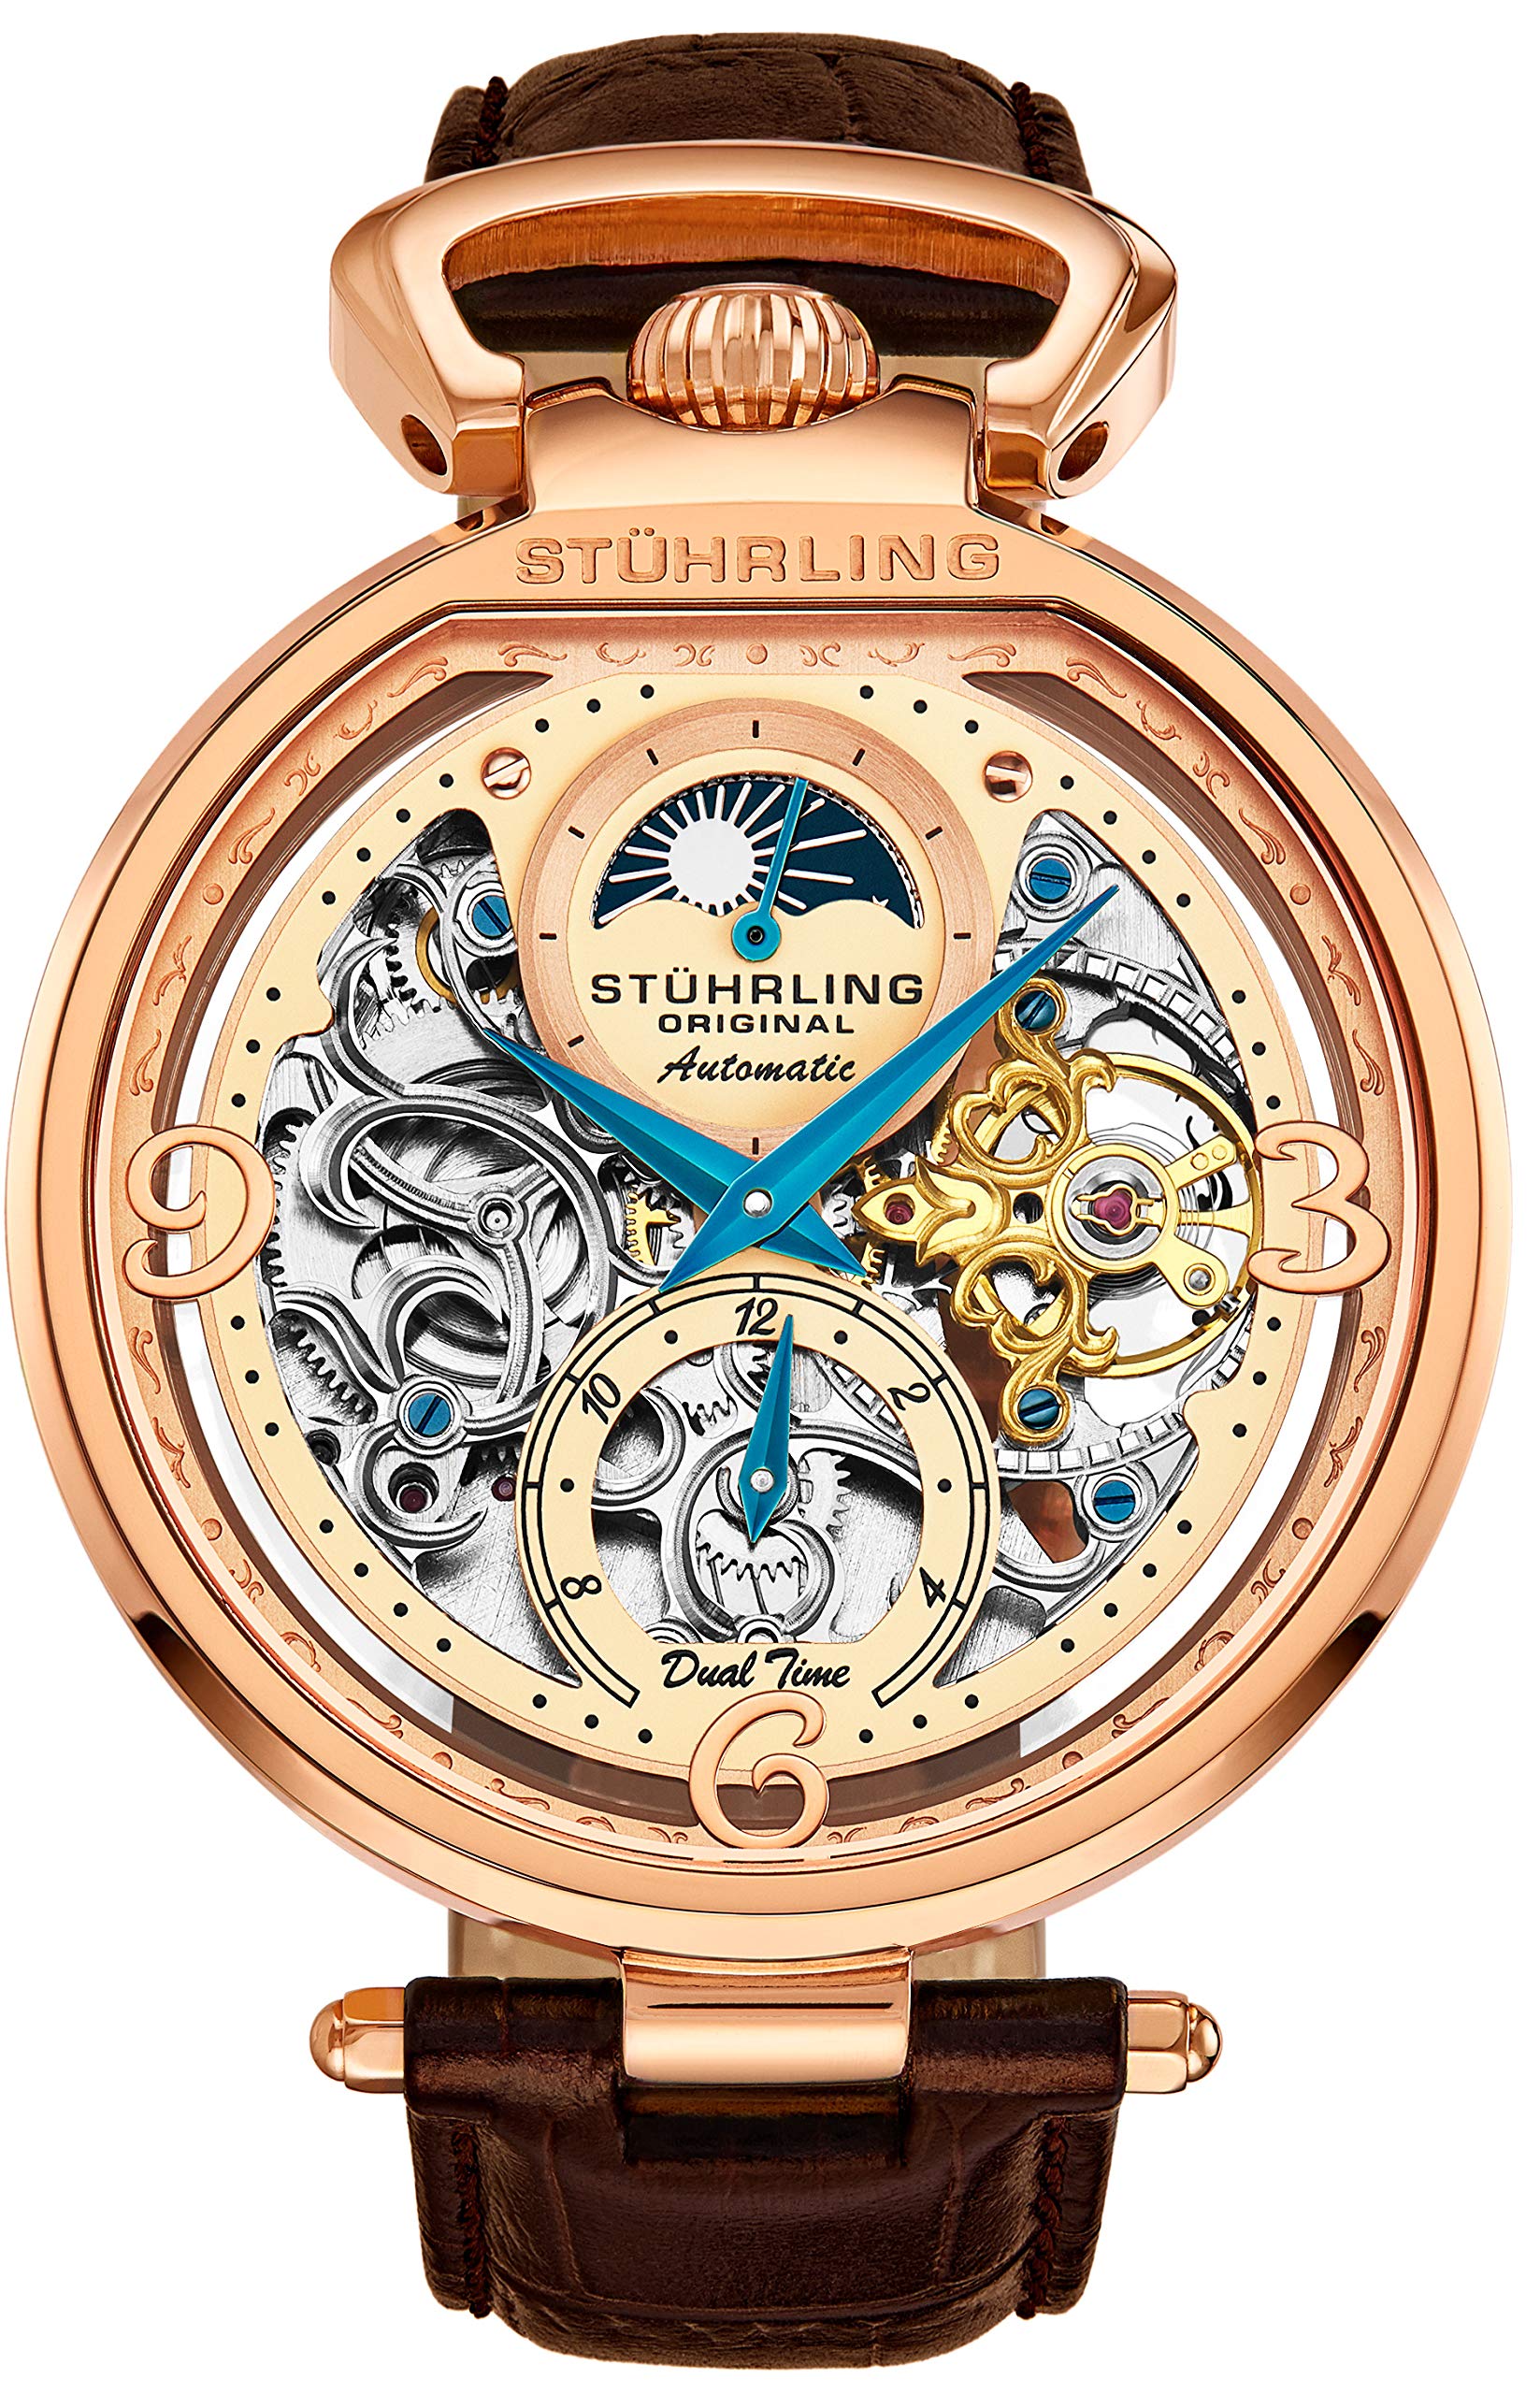 Stührling Original Mens Analog Display Automatic Self Wind, Skeleton Dial, Dual Time, AM/PM Sun Moon, Leather Band, 127A2 Series